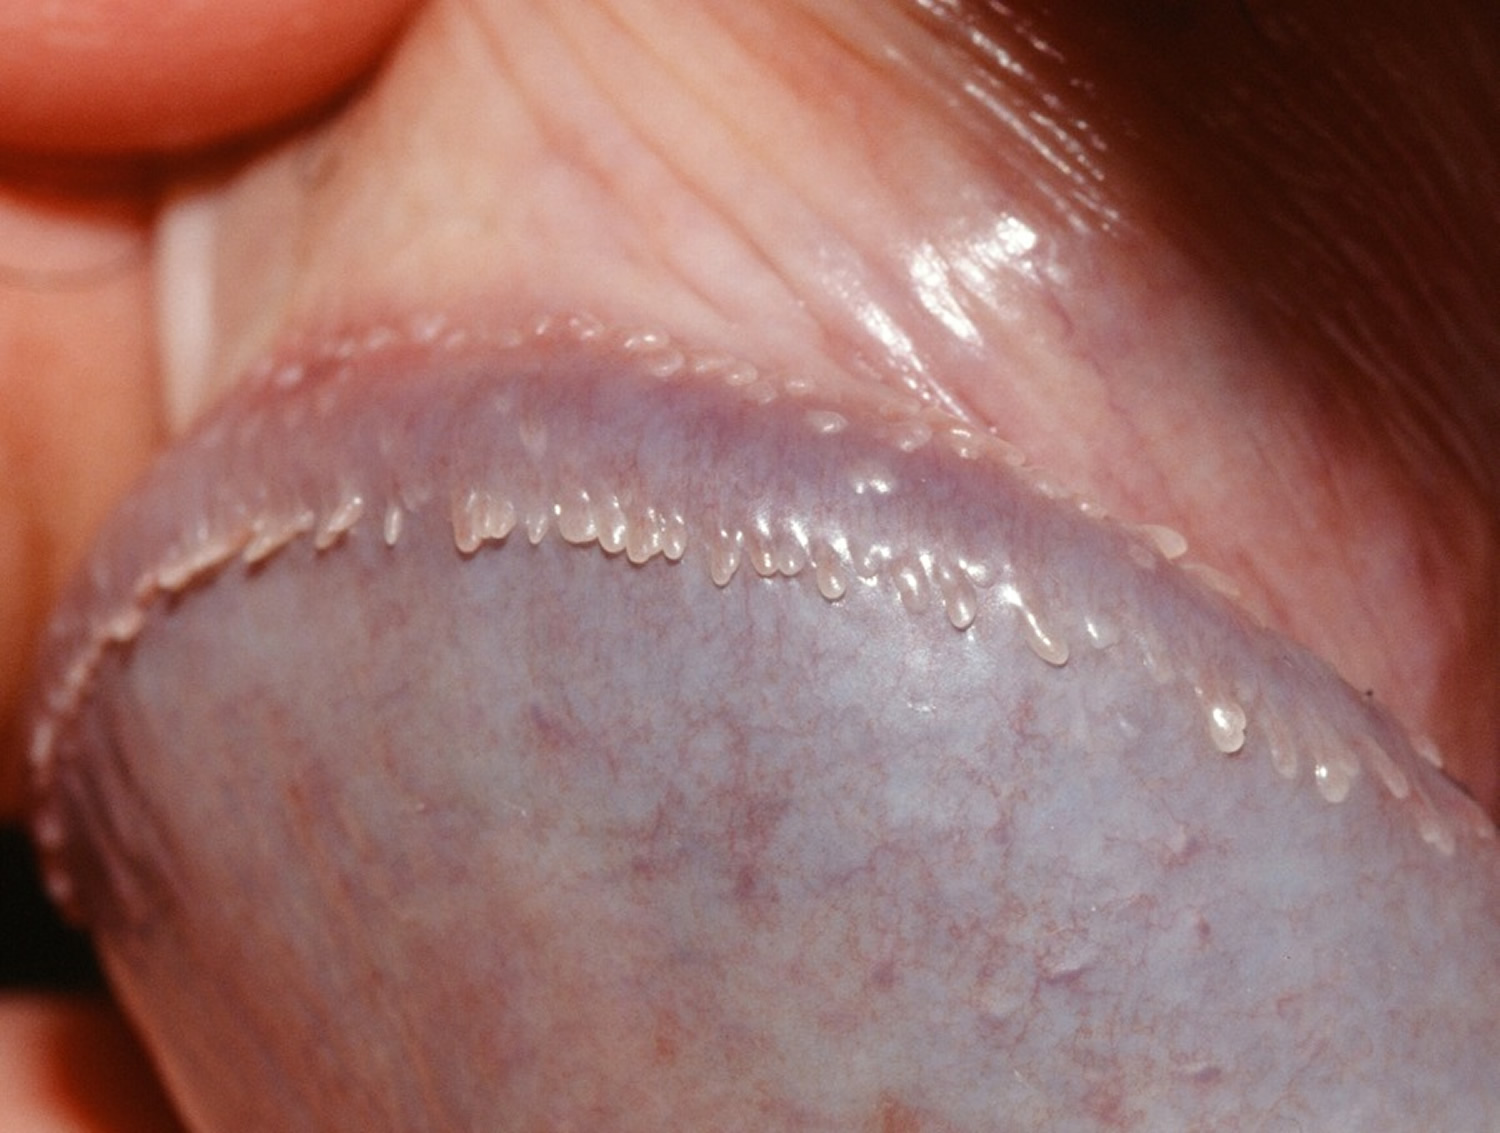 Pearly penile papules are small dome-shaped to thread-like